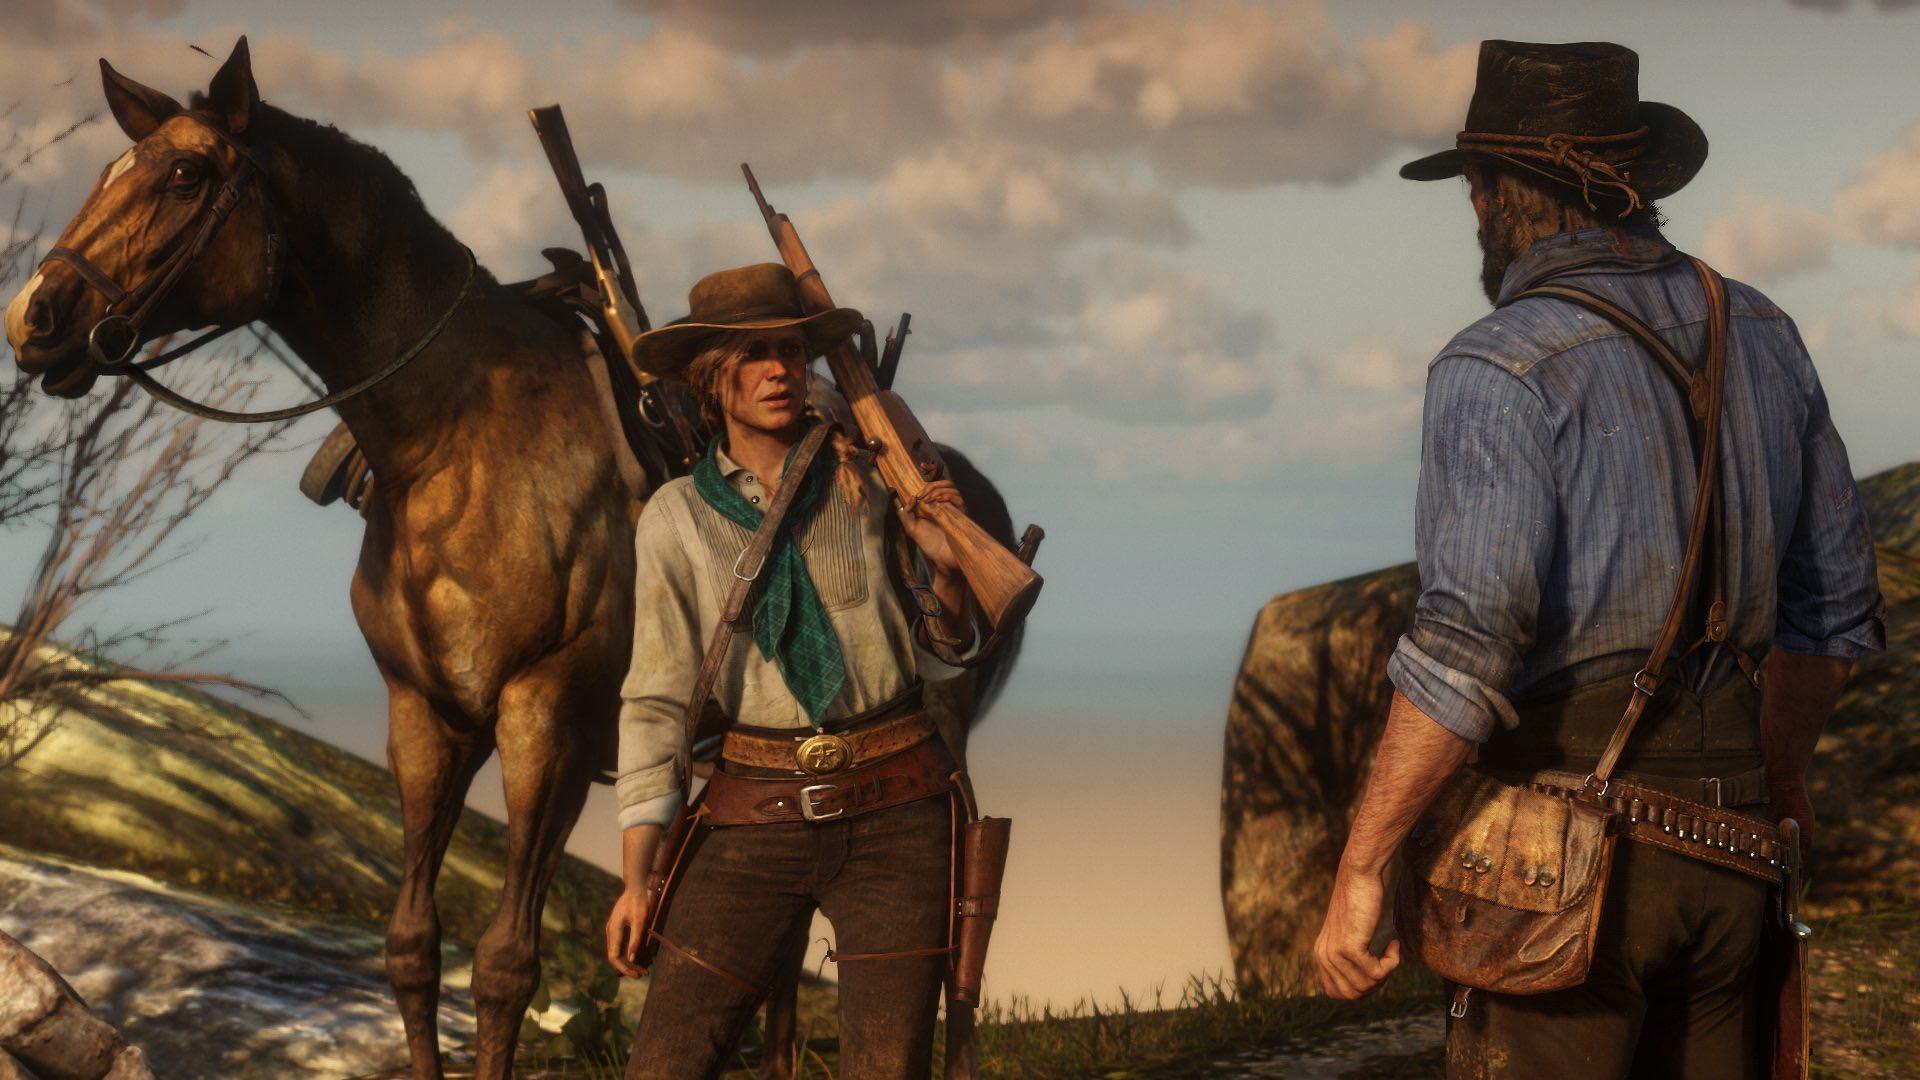 Red Dead Redemption 2 Gets New Screenshots Highlights the Game's World